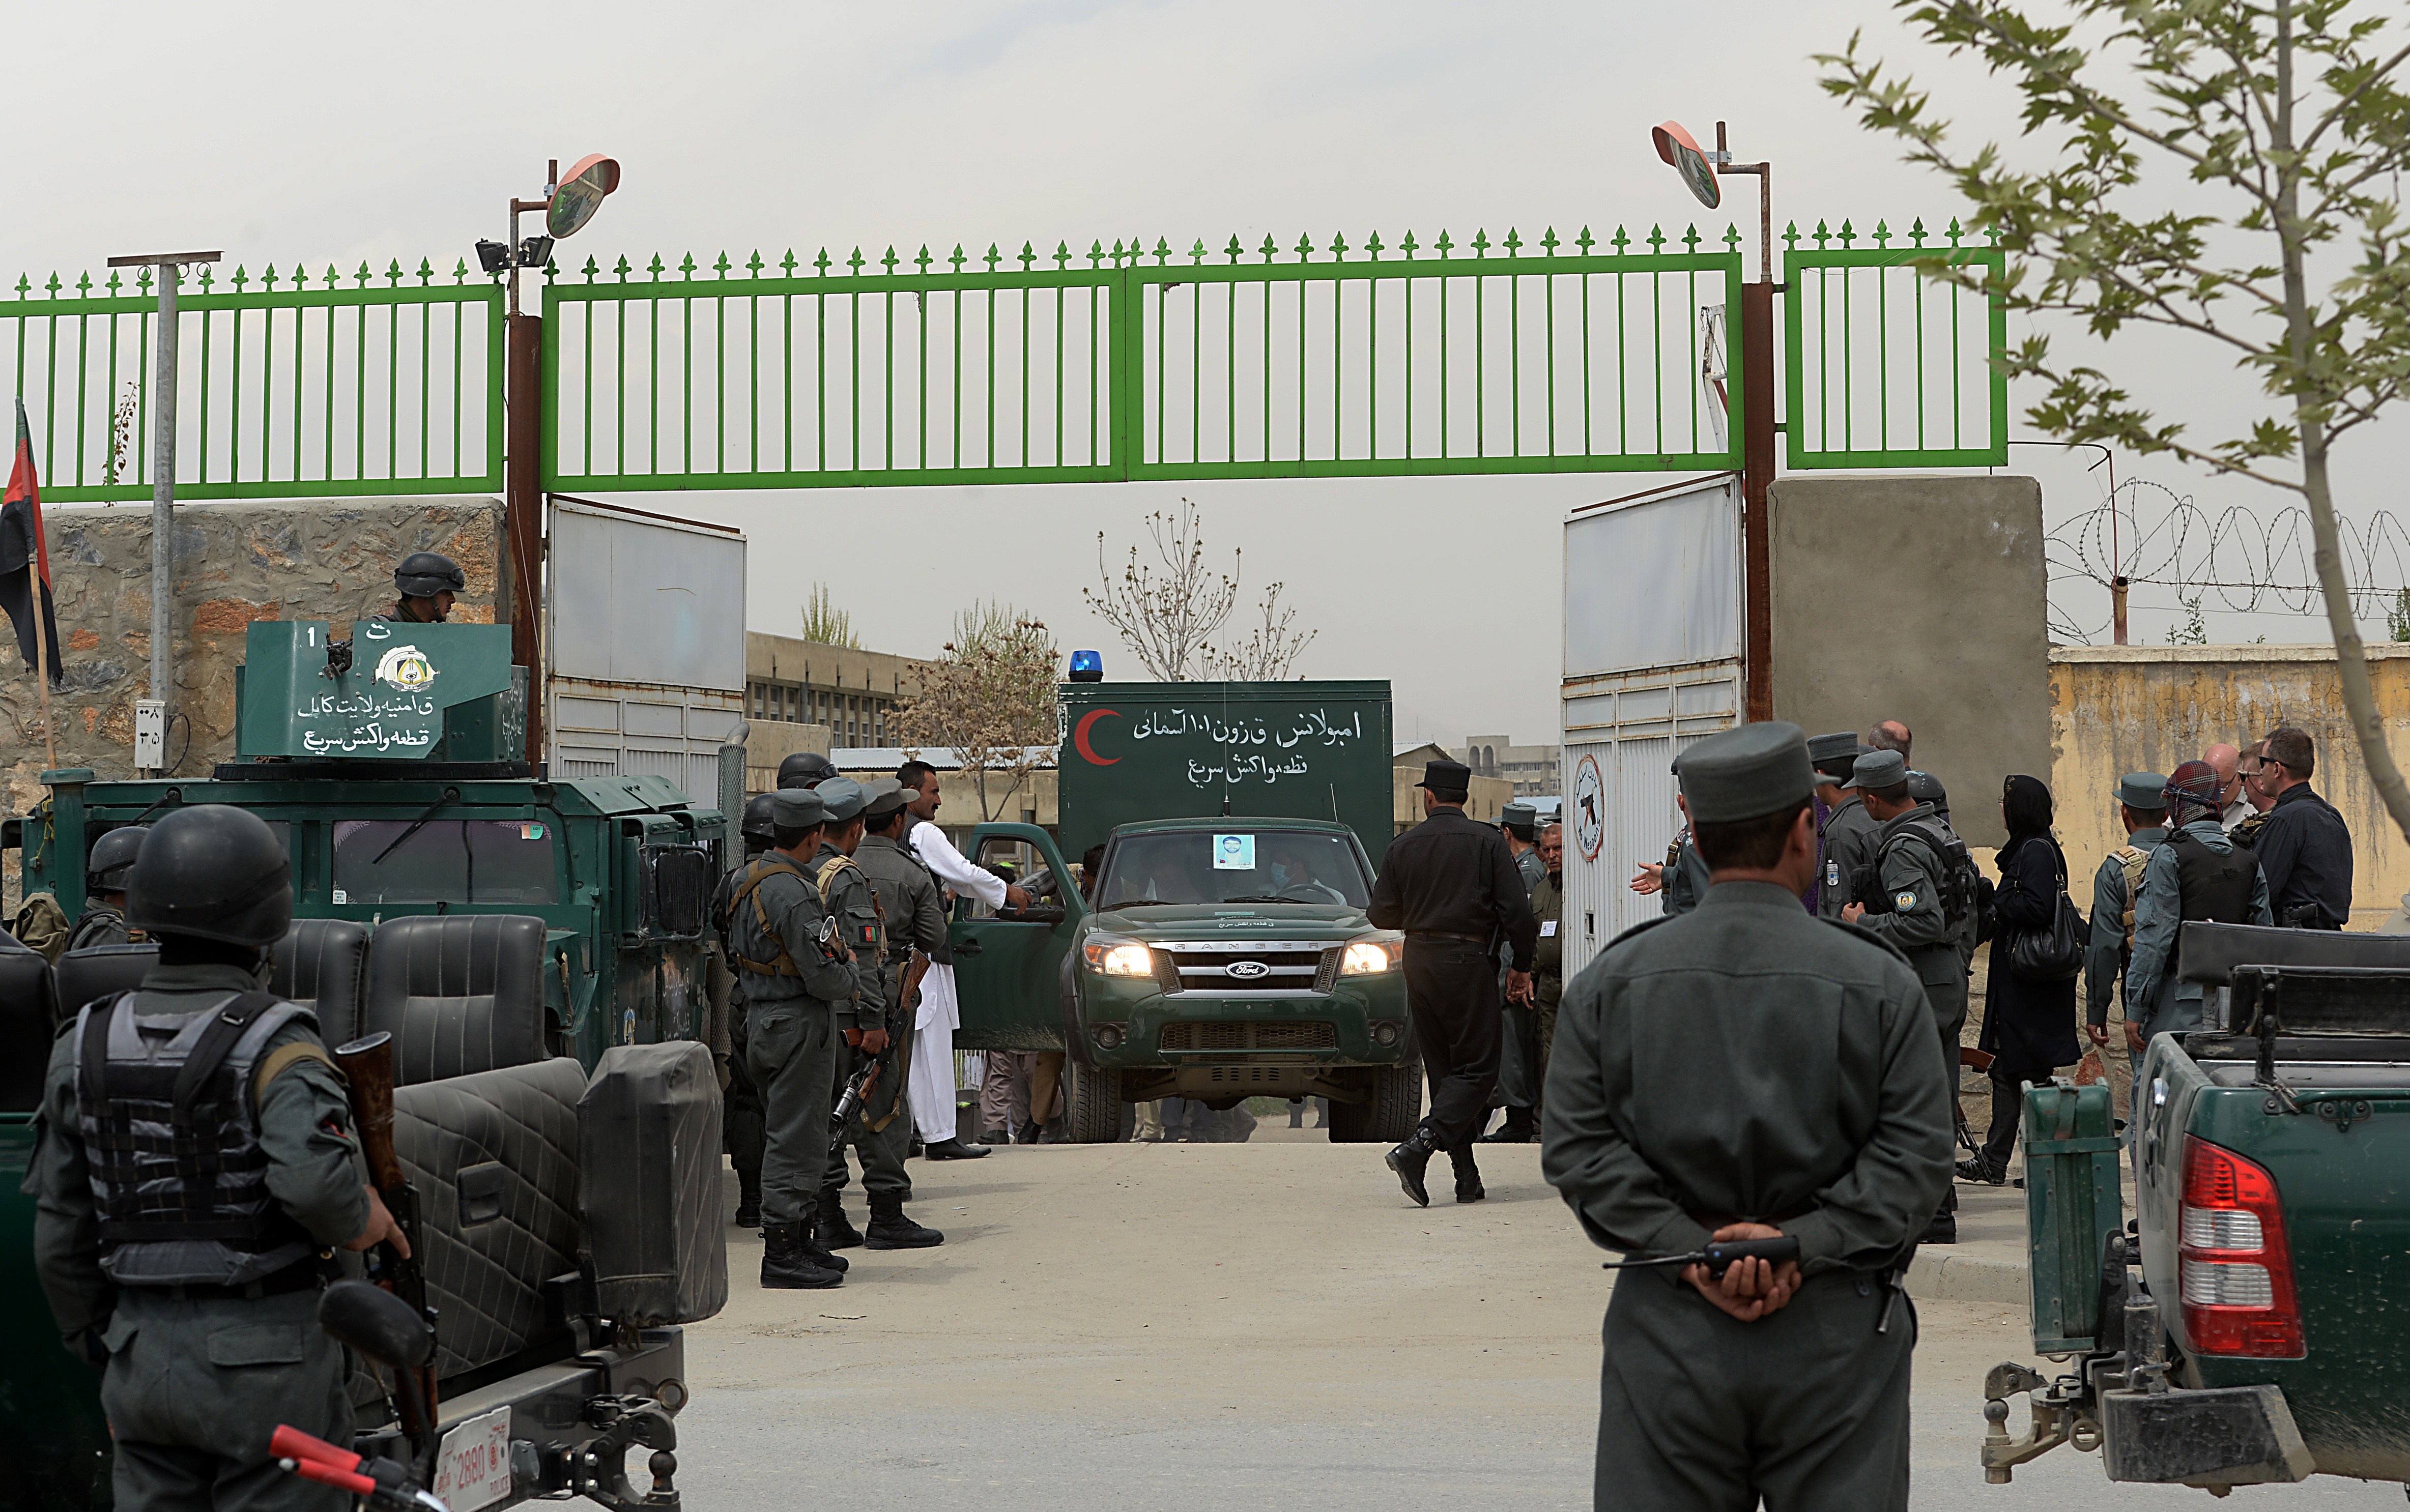 An ambulance carrying victims of a shooting leaves through the gate of the Cure hospital in the Afghan capital Kabul on April 24, 2014. A guard shot dead three foreigners at a US charity hospital in Kabul on April 24, the Afghan government said, with hospital staff saying at least one of the victims was a foreign doctor. 'As a result of shooting by a security guard of the Cure hospital... three foreign nationals have been killed and one female medical staff injured,' a statement from the ministry of interior said. AFP PHOTO/SHAH Marai (Photo credit should read SHAH MARAI/AFP/Getty Images)